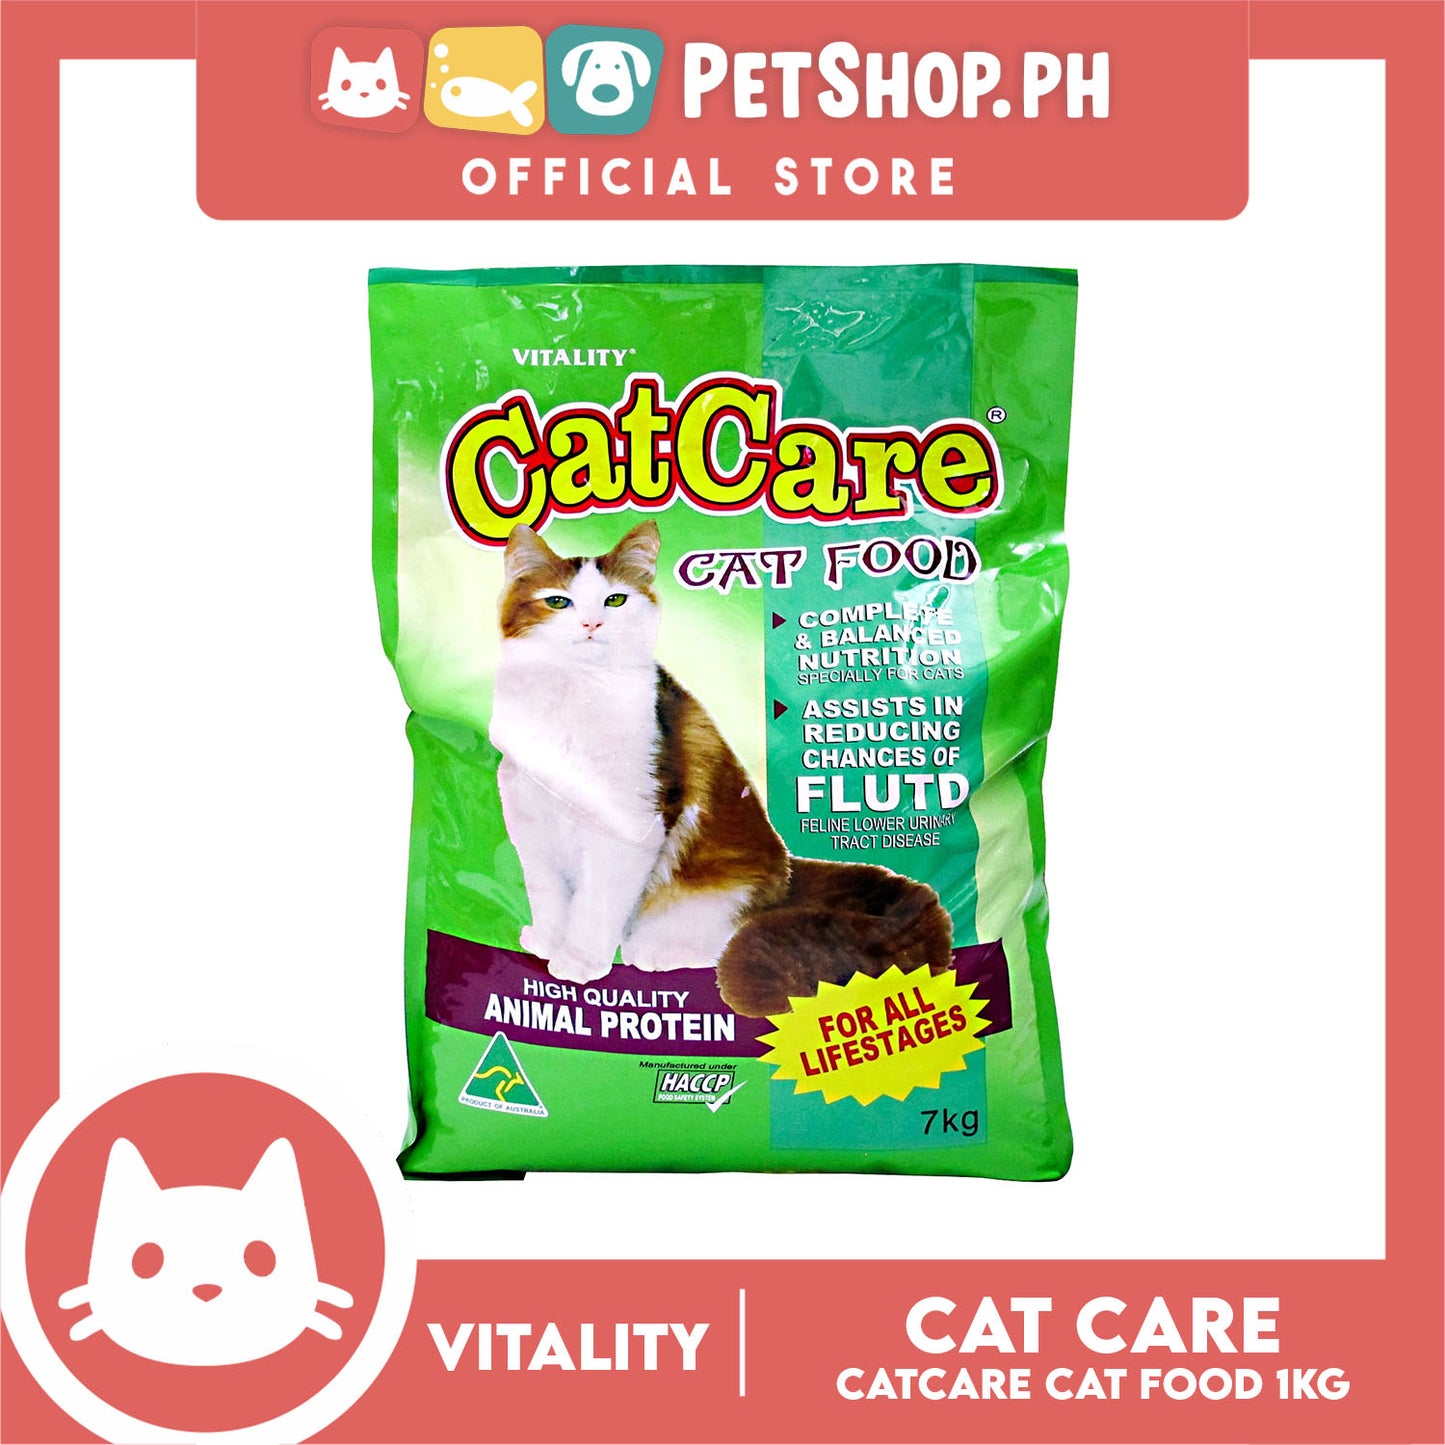 Vitality Cat Care Cat Food 7kg High Quality Animal Protein, Complete And Balanced Nutrition For All Lifestages Cat Food, Cat Dry Food